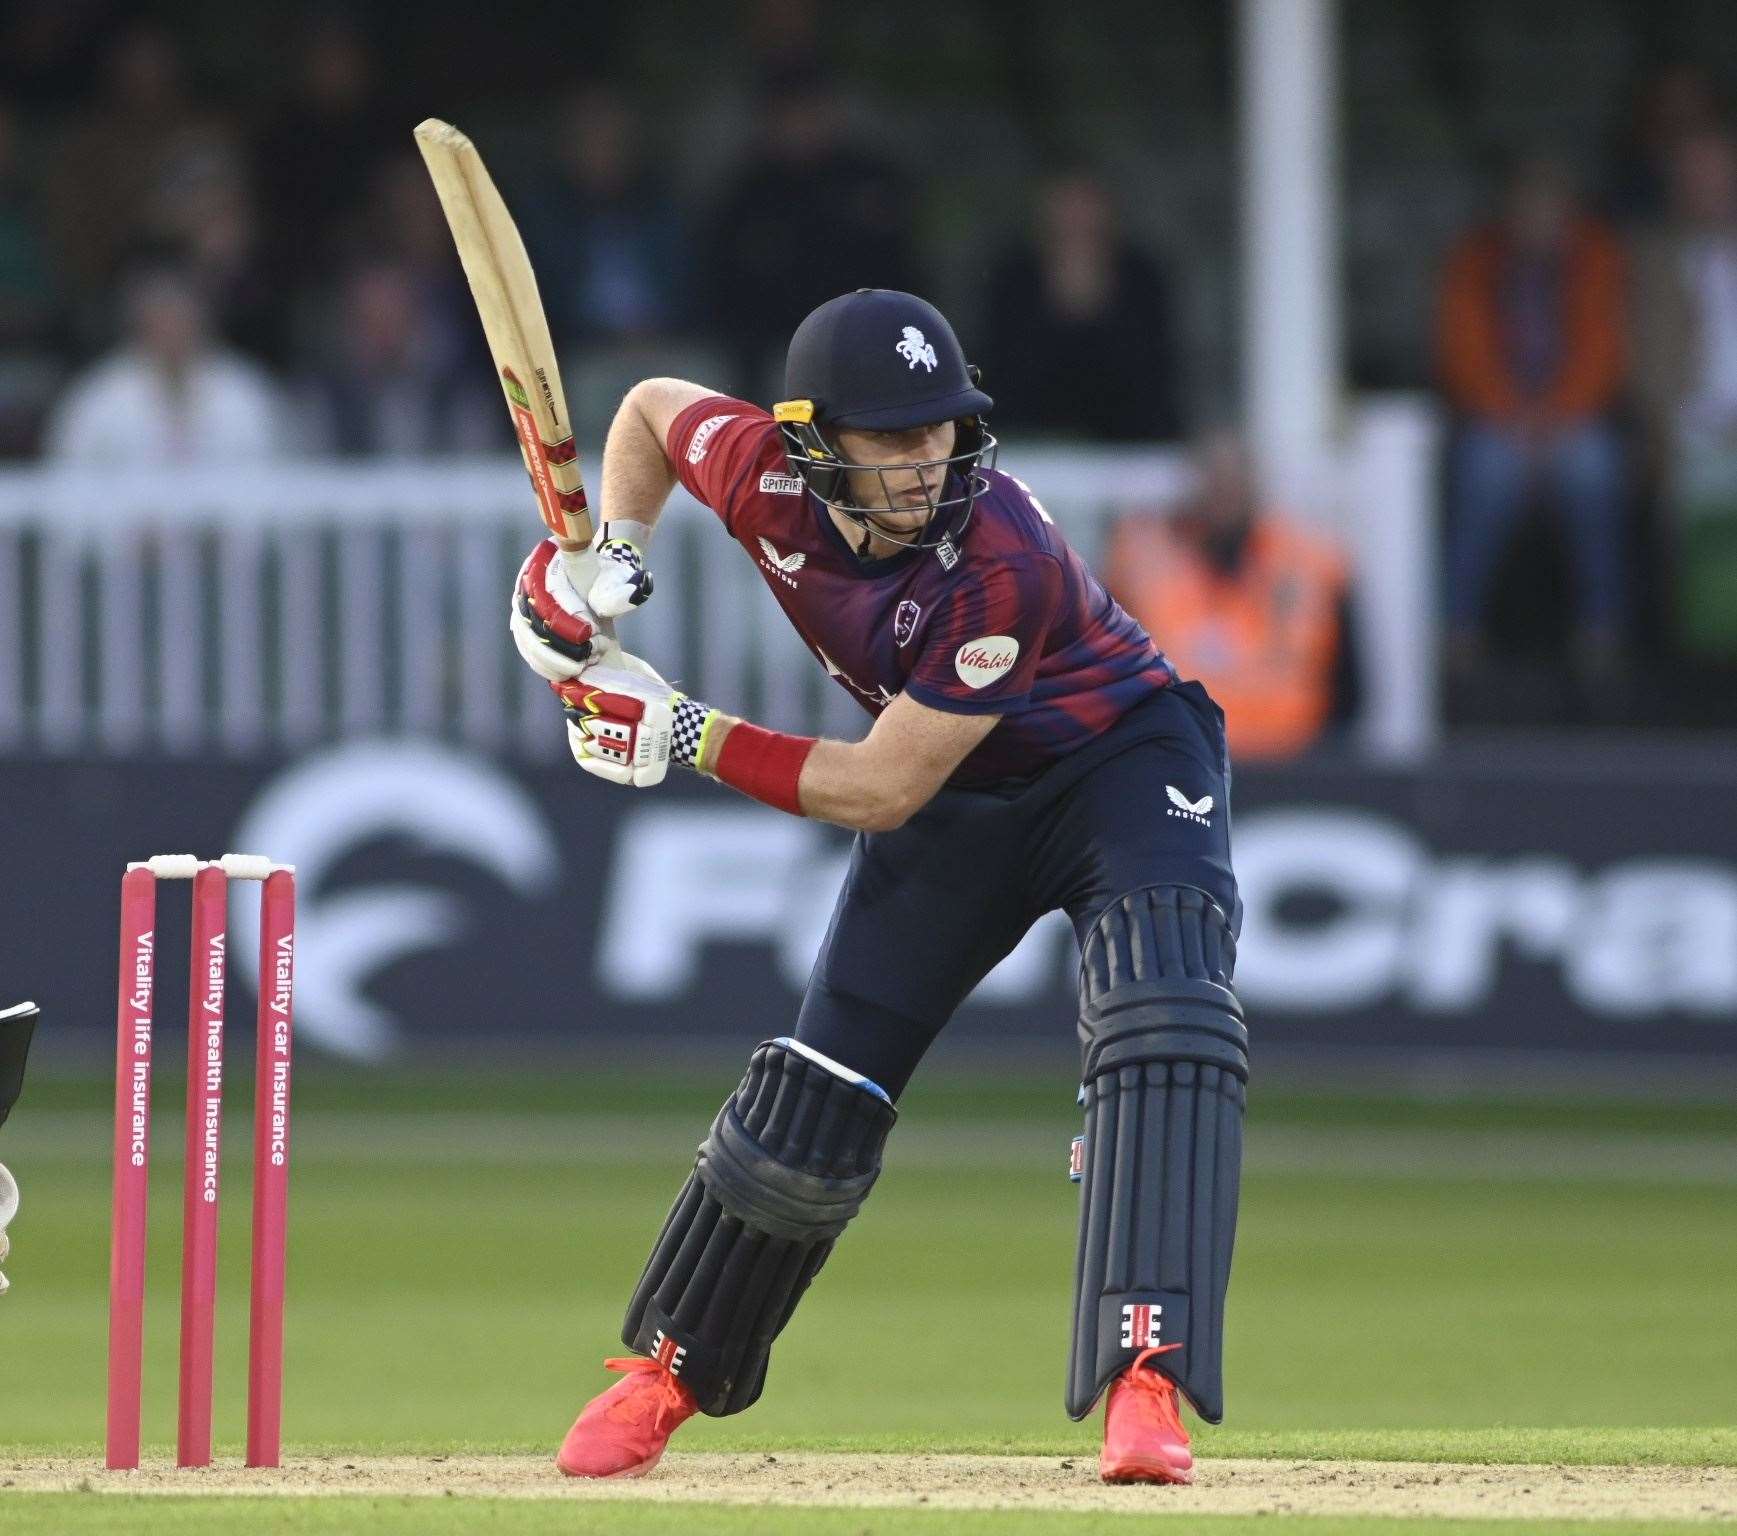 Kent captain Sam Billings’ 27-ball 29 wasn’t enough for The Spitfires in their rain-affected chase. Picture: Barry Goodwin